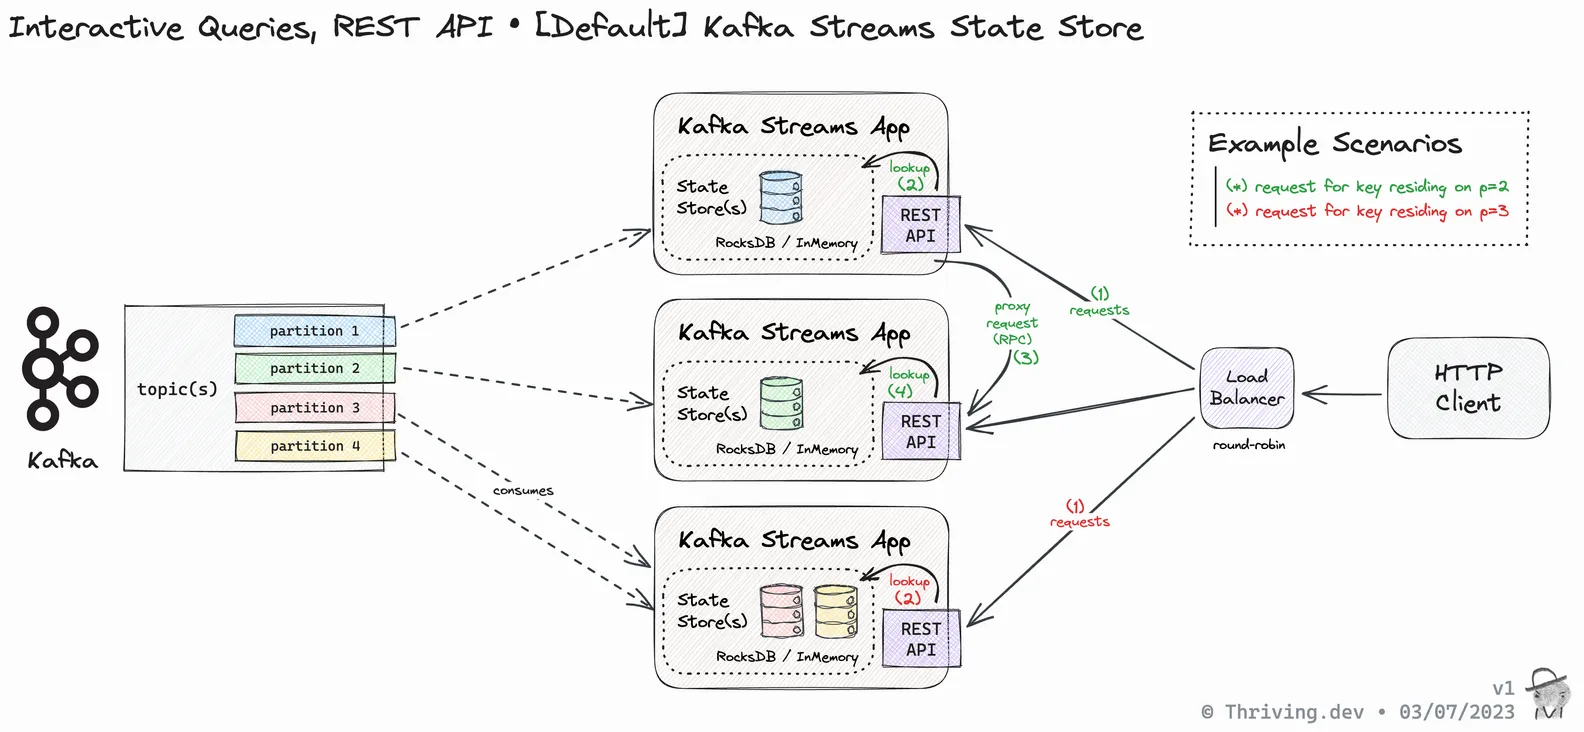 Integration Diagram for a Kafka Streams State Store exposed via REST-API using Interactive Queries v1